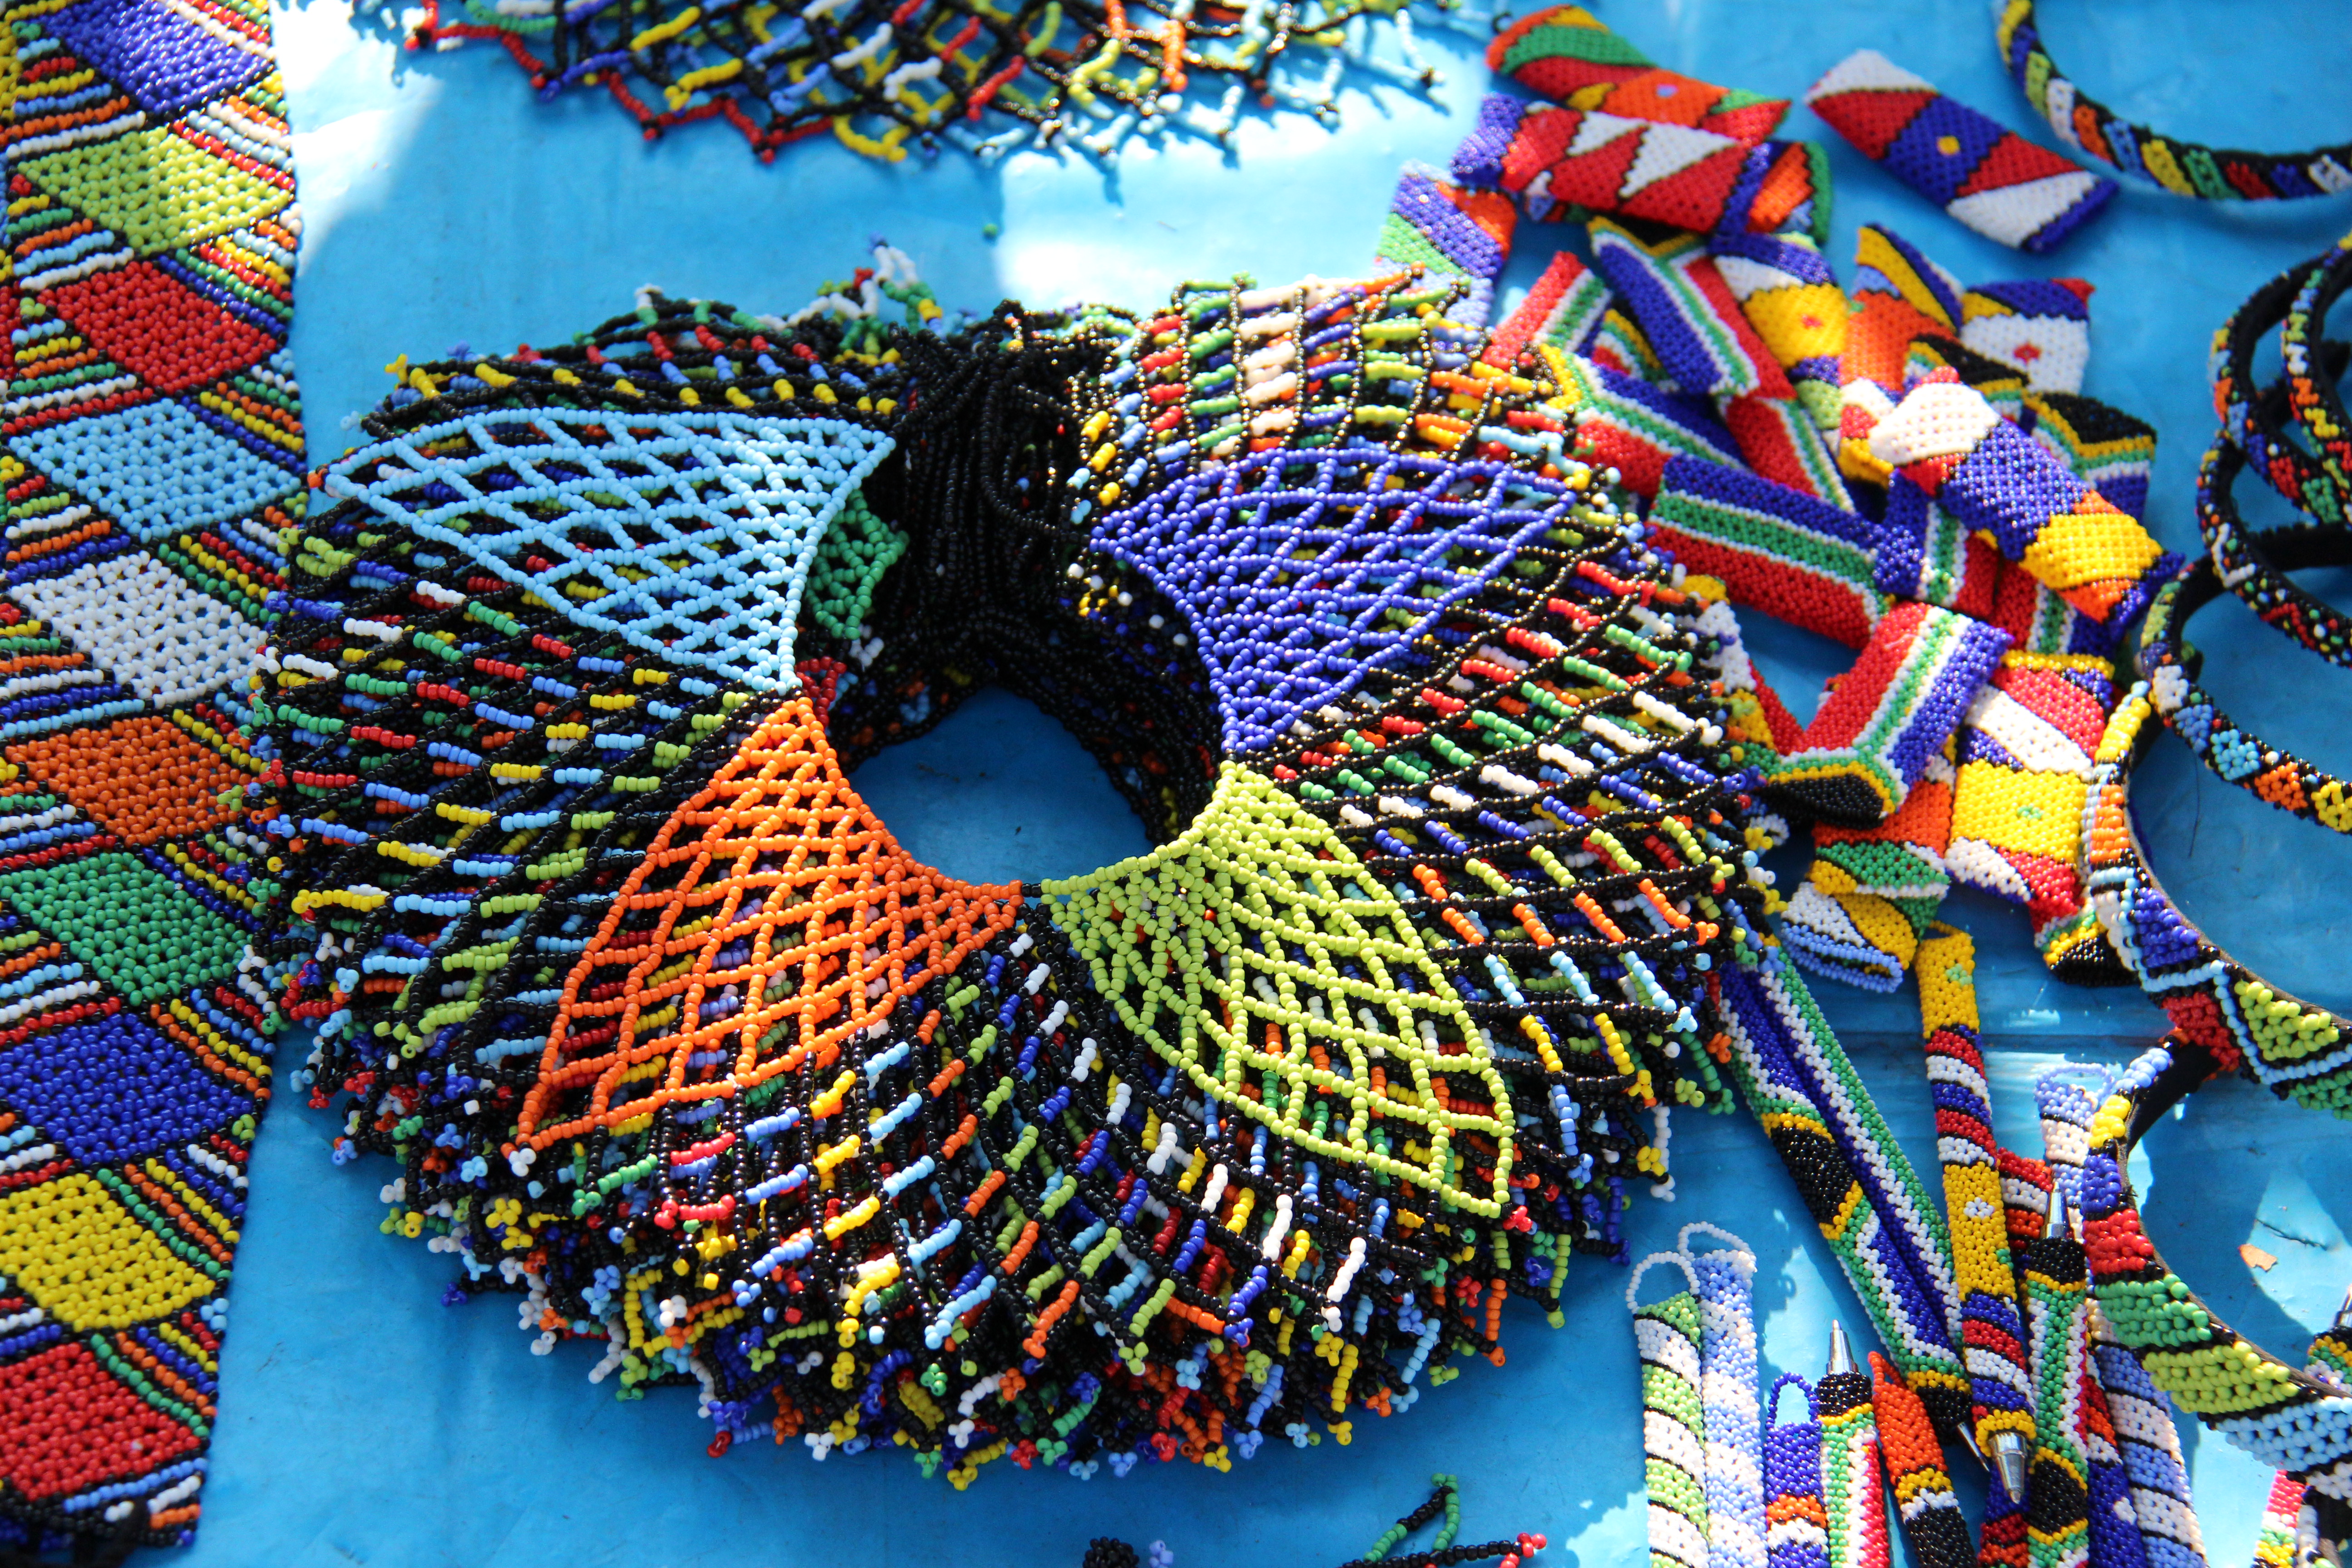 File:Beadwork Wire Art and Crafts (27).JPG - Wikimedia Commons